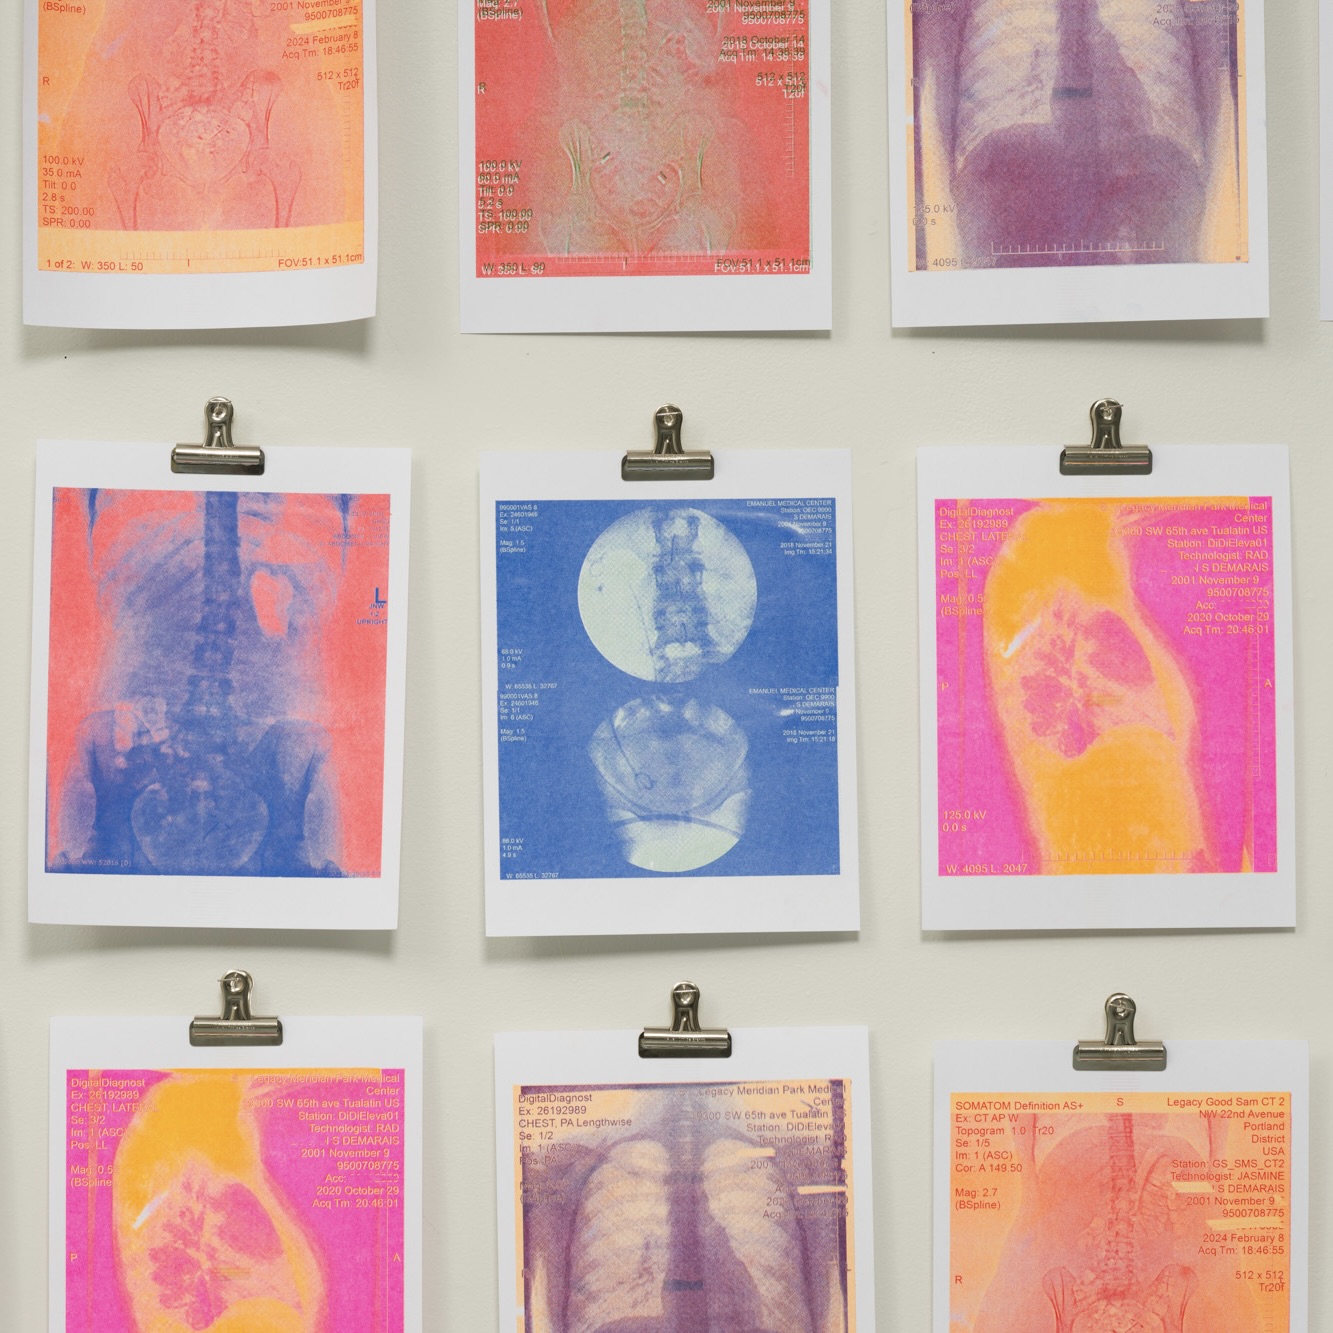 Series of risograph prints of medical x-rays